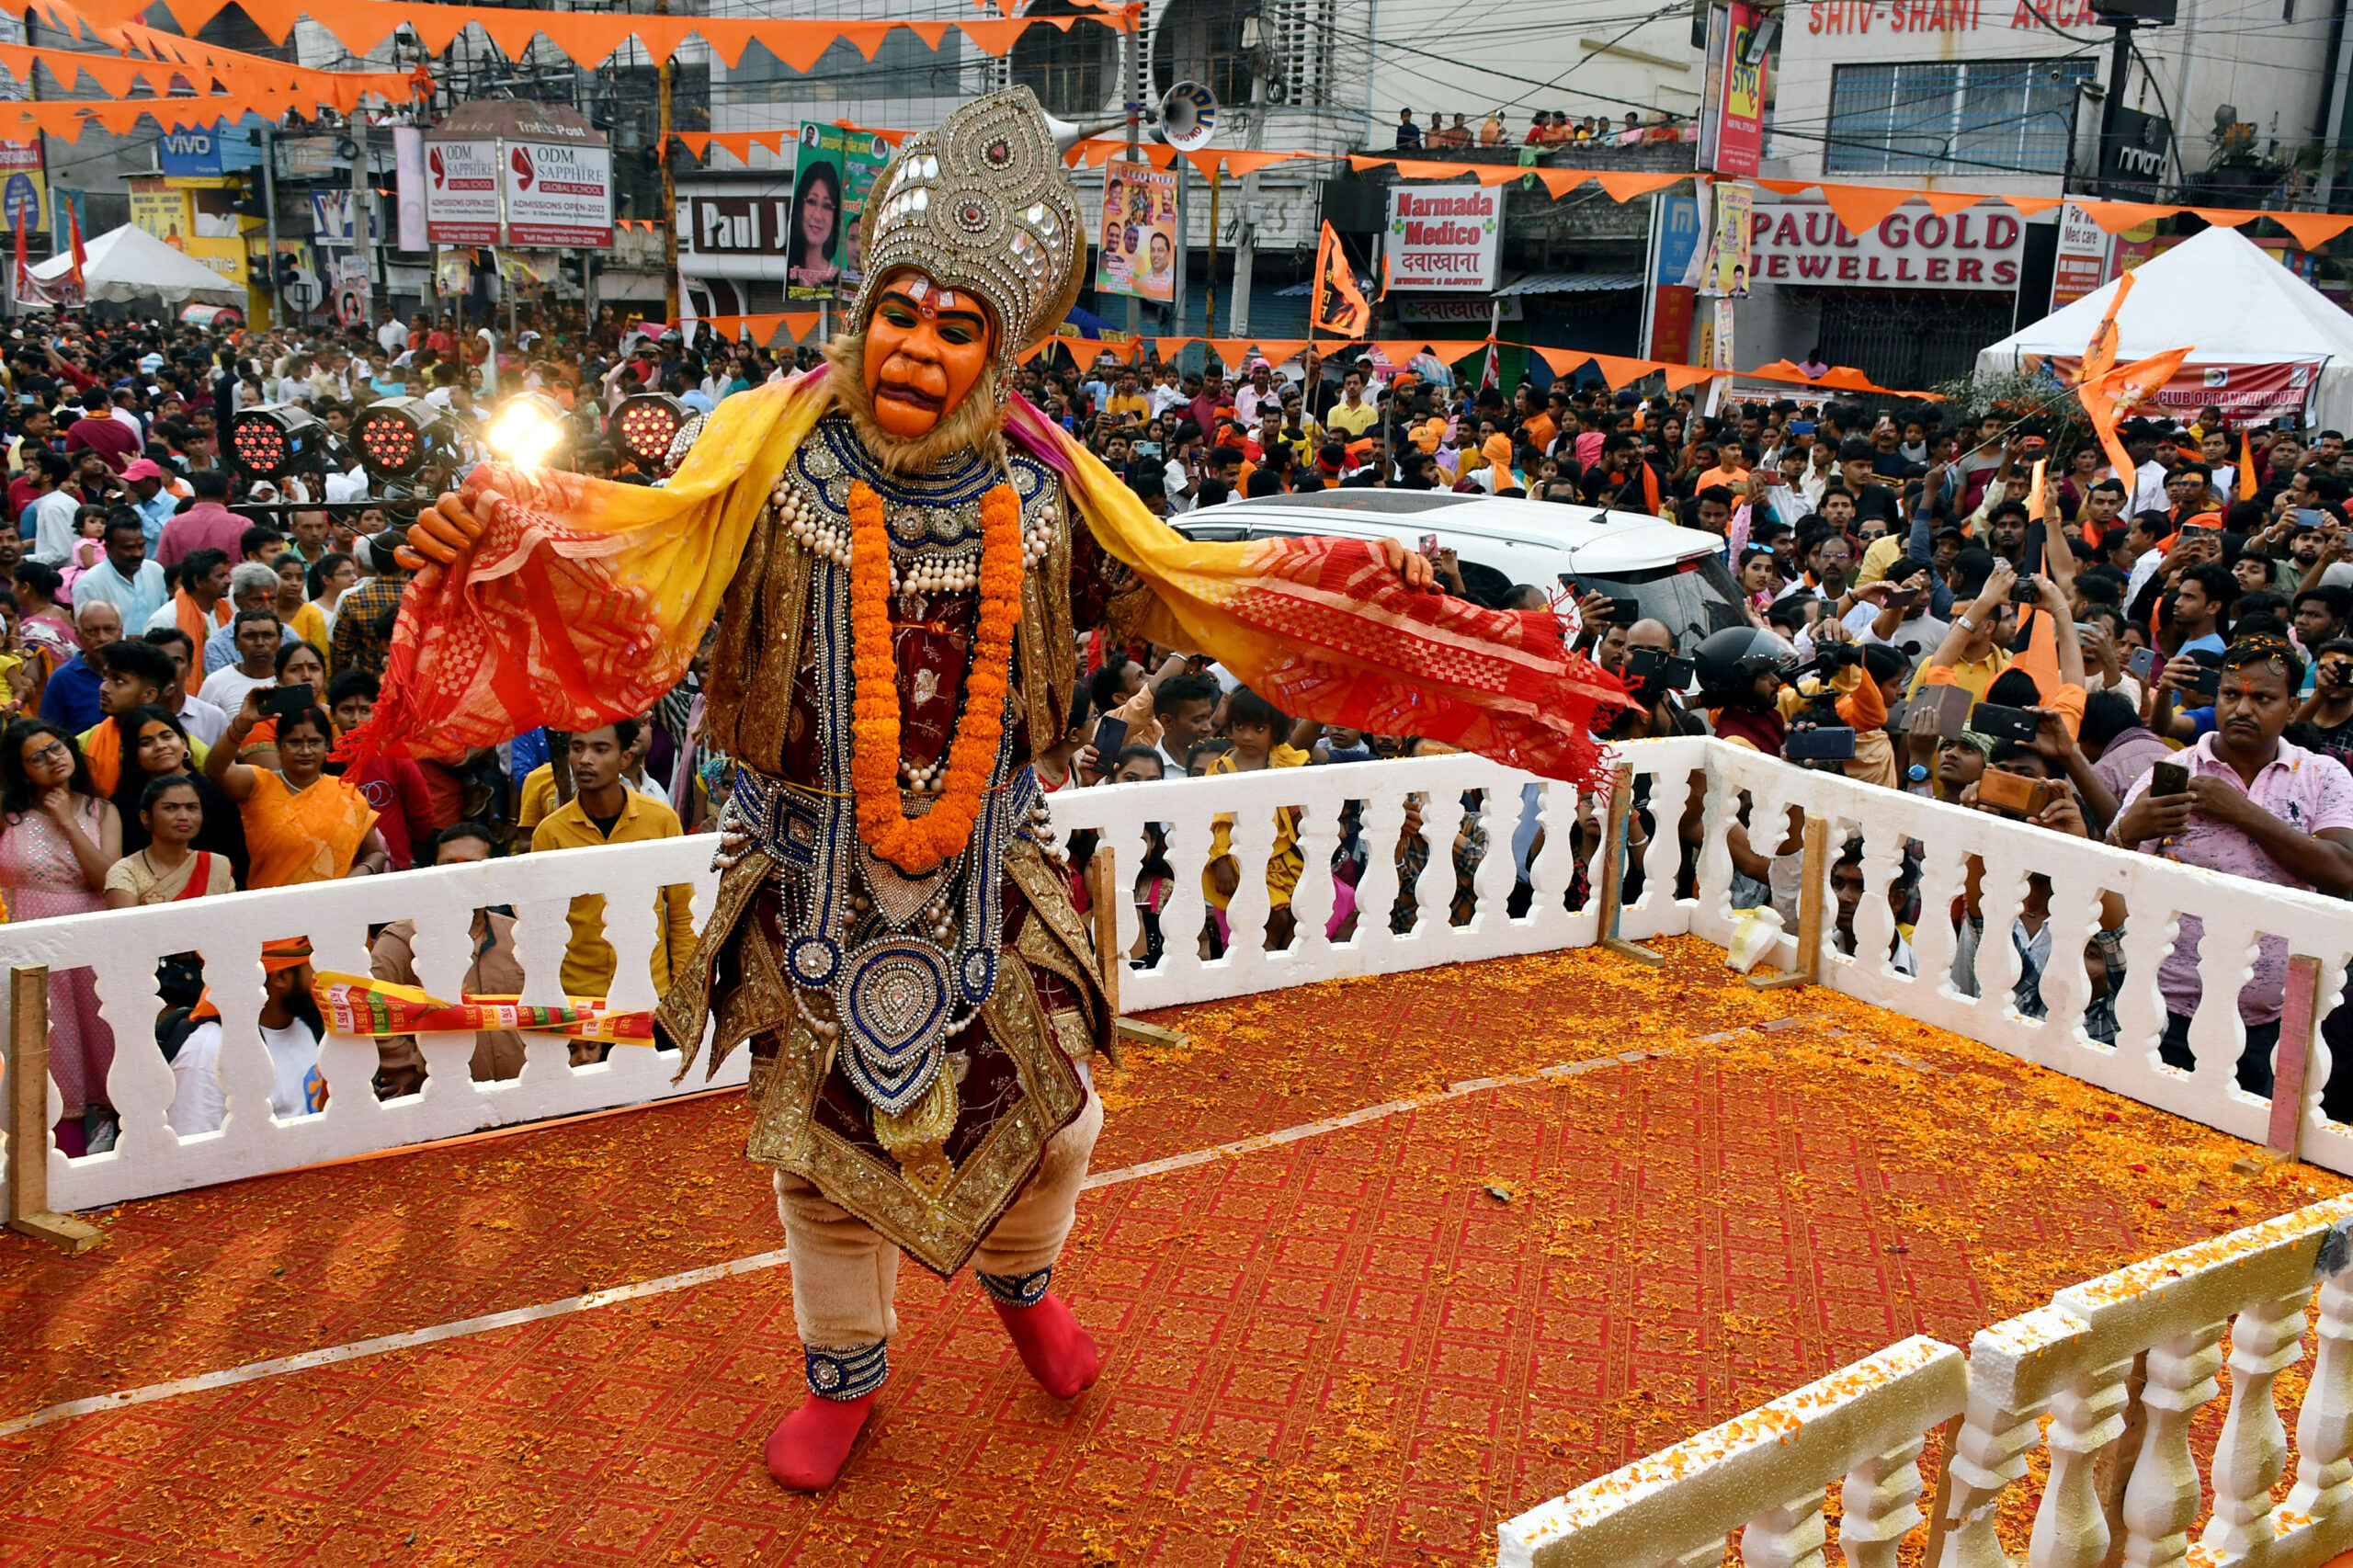 A devotee dressed as Lord Hanuman performs during the procession on the occasion of Ram Navami